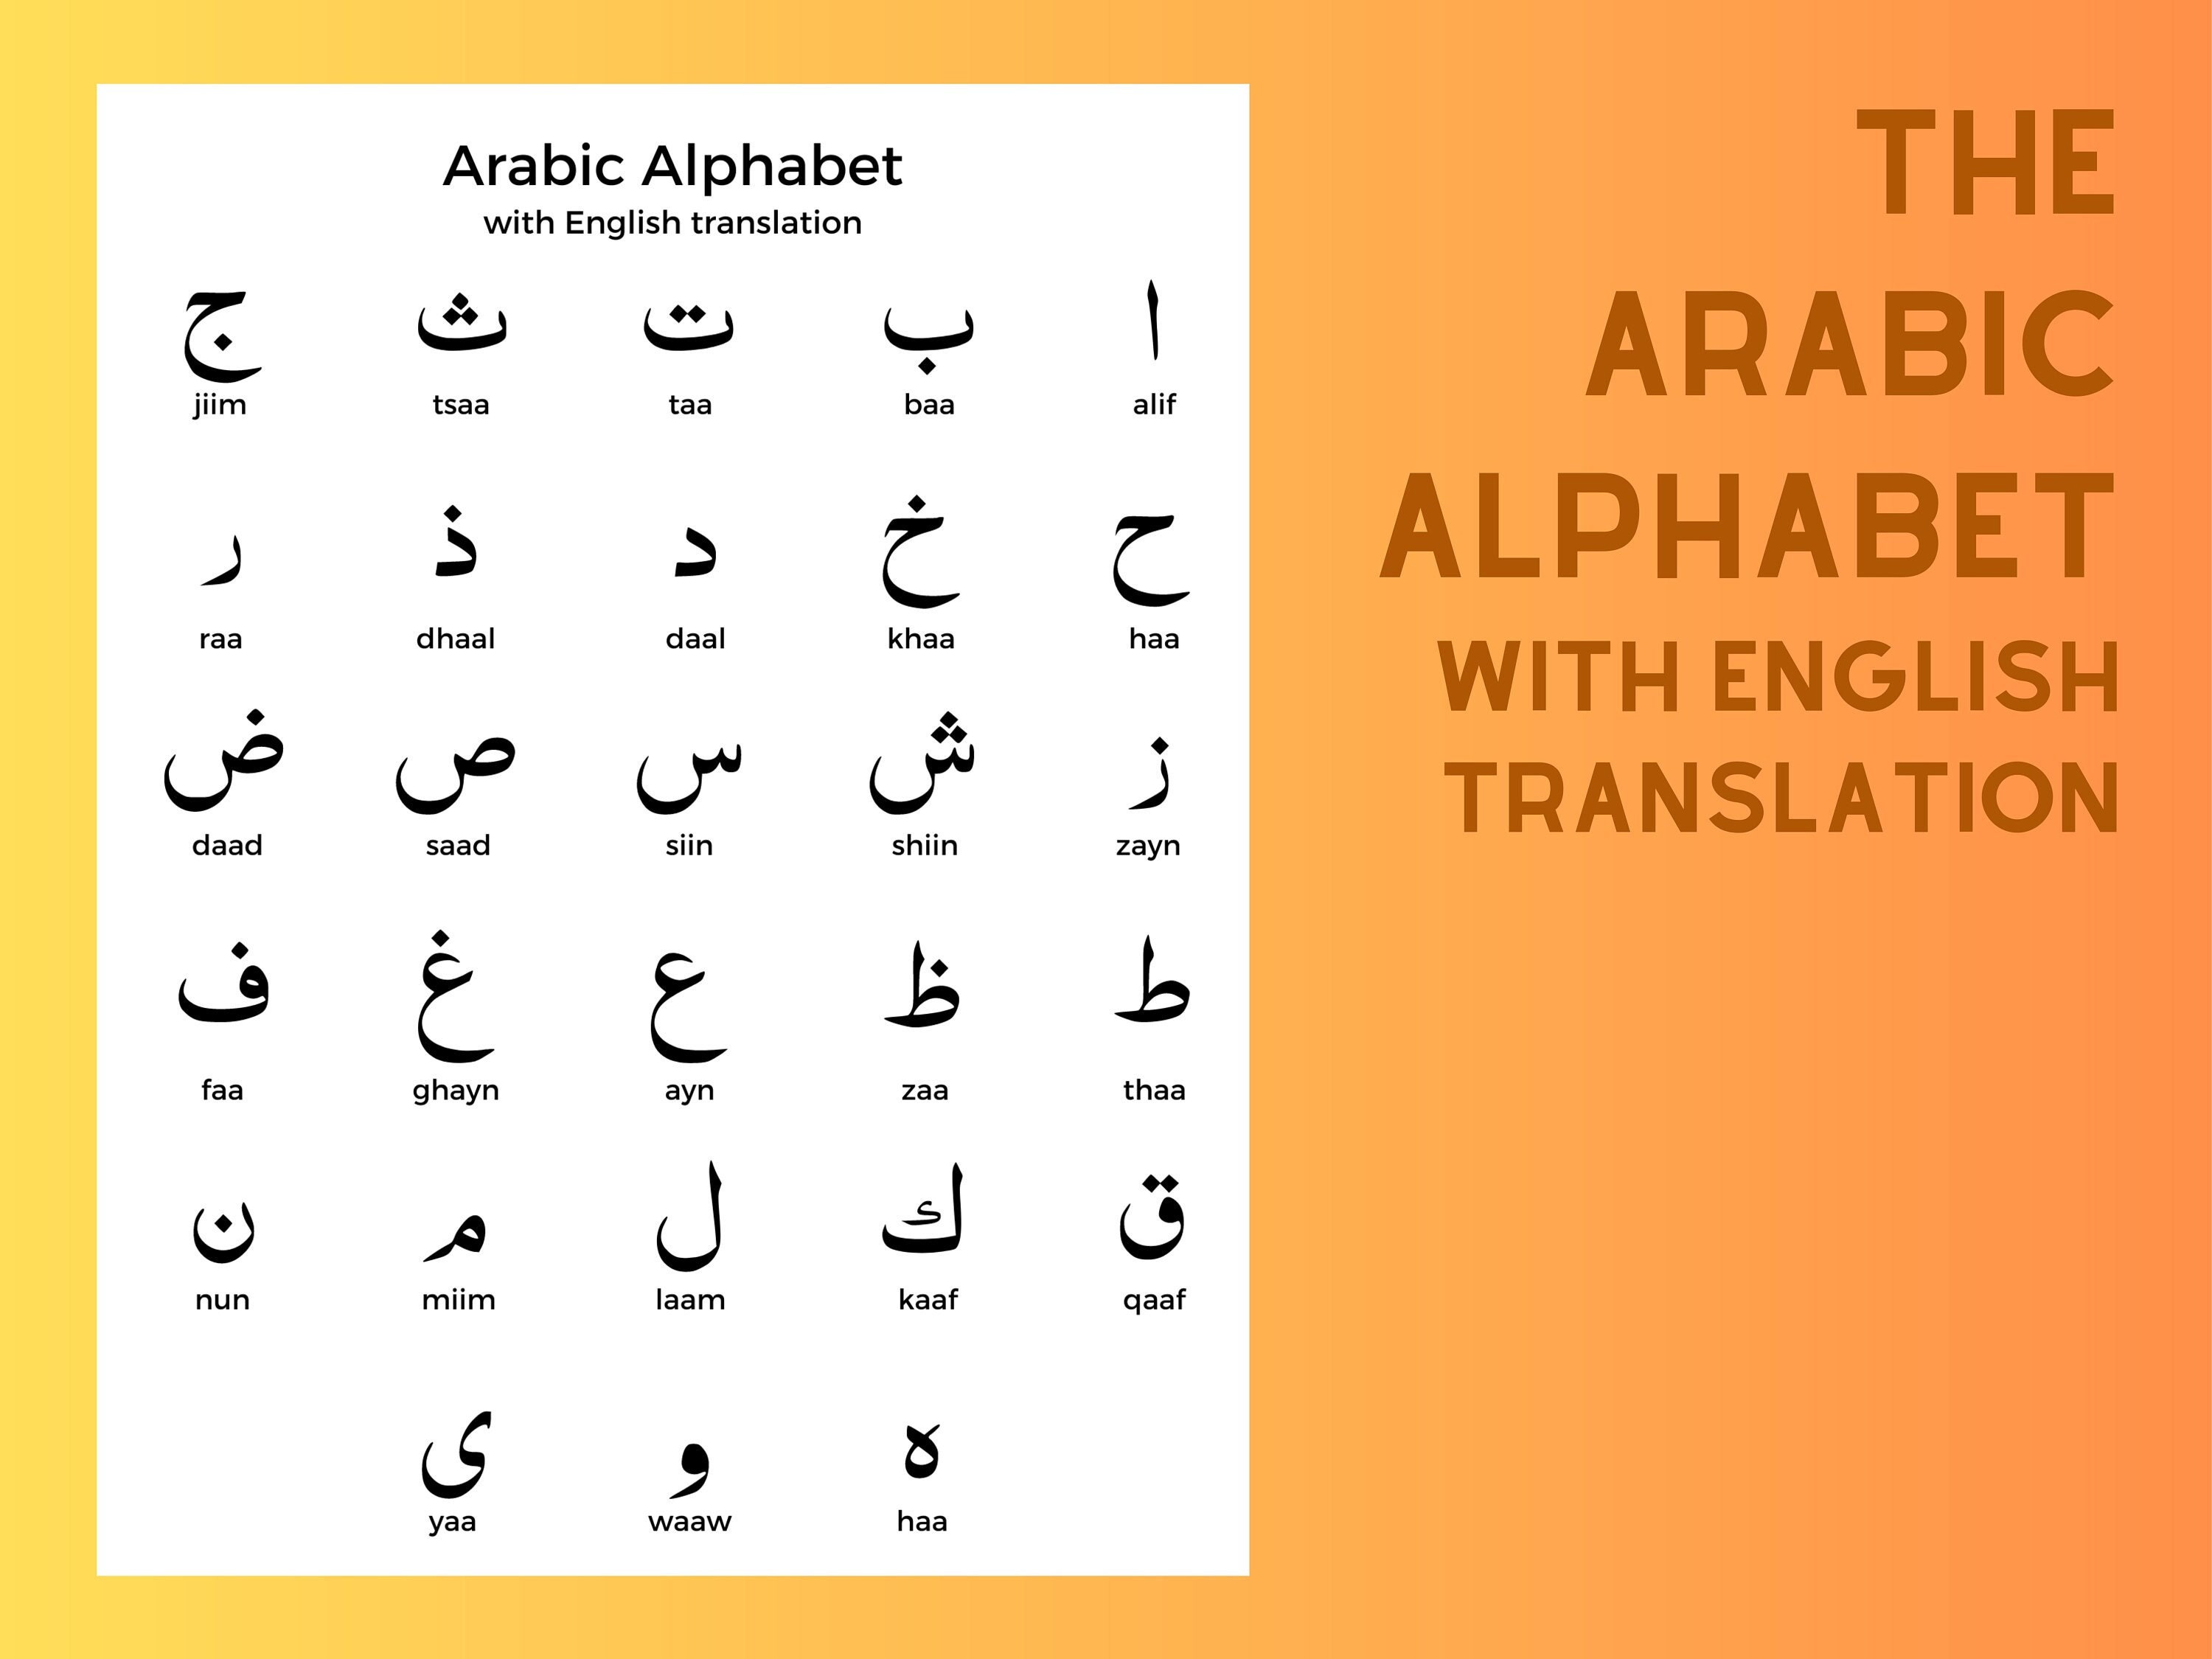 Arabic Alphabet With English Translation Reference Sheet photo picture